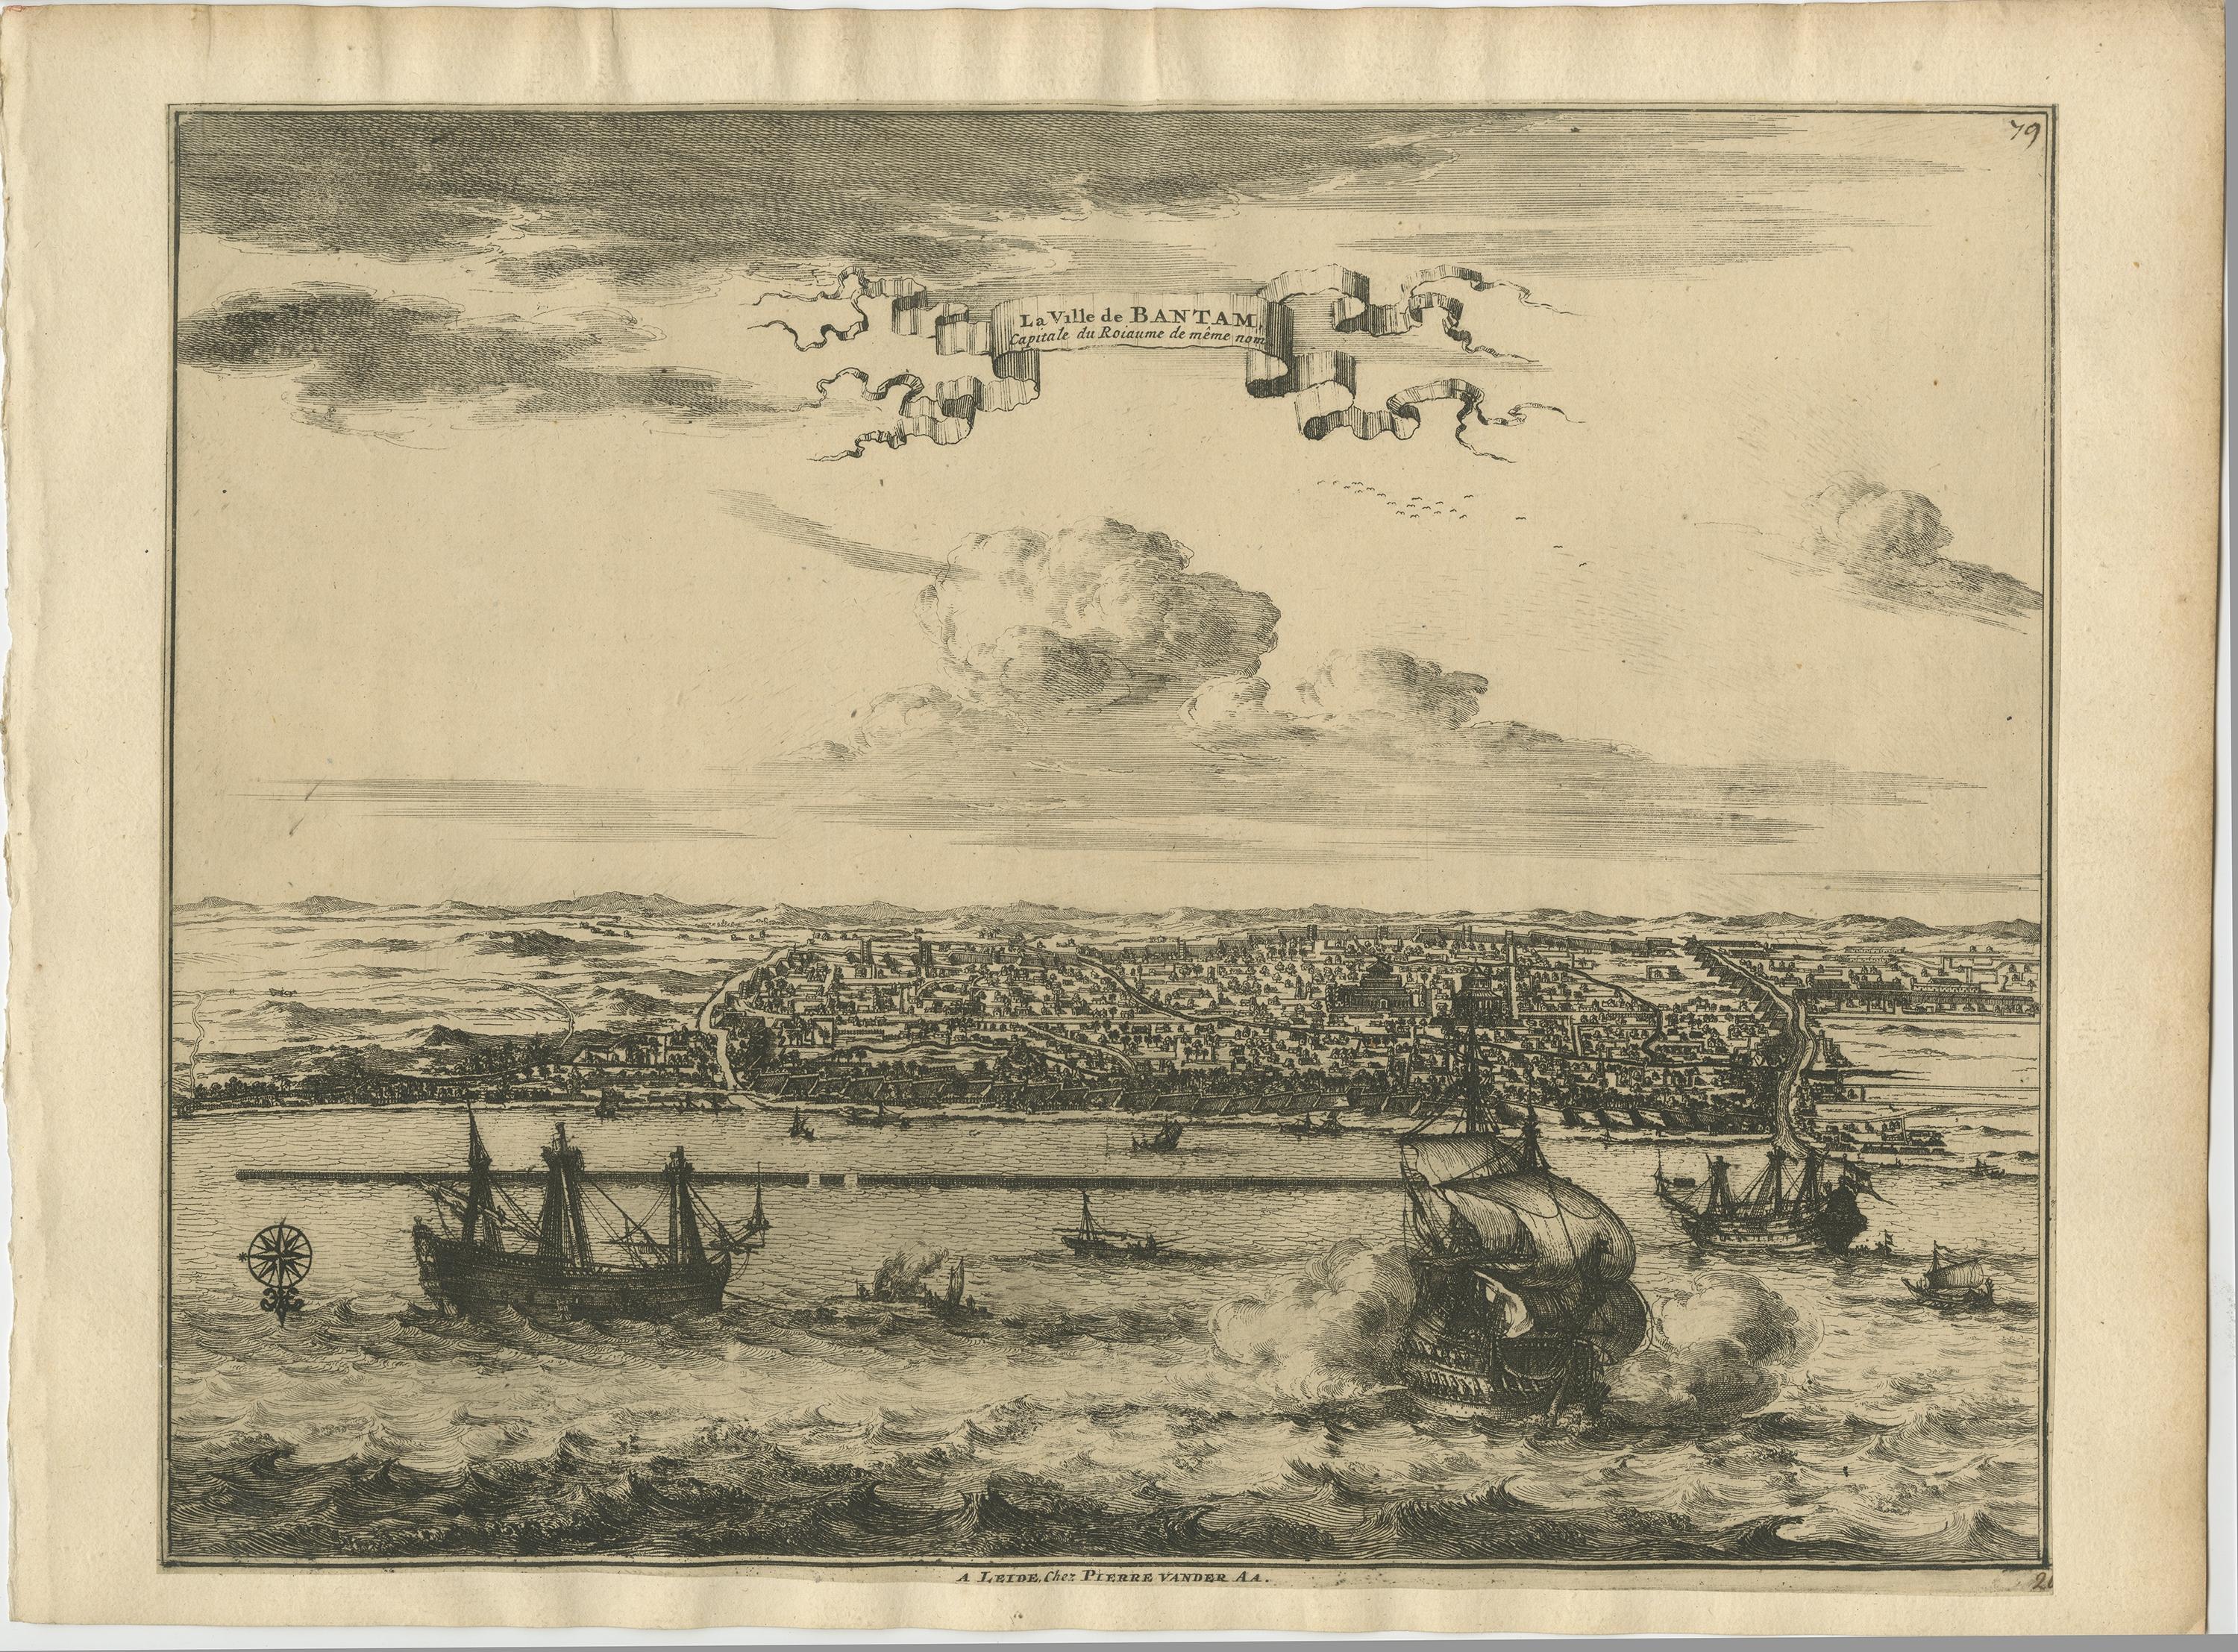 Antique print titled 'La Ville de Bantam capitale du Roiaume de meme nom'. 

A bird's eye view of the city Banten or Bantam near the western end of Java in Indonesia. Several tall ships and smaller nautical vessels in the harbour. This print